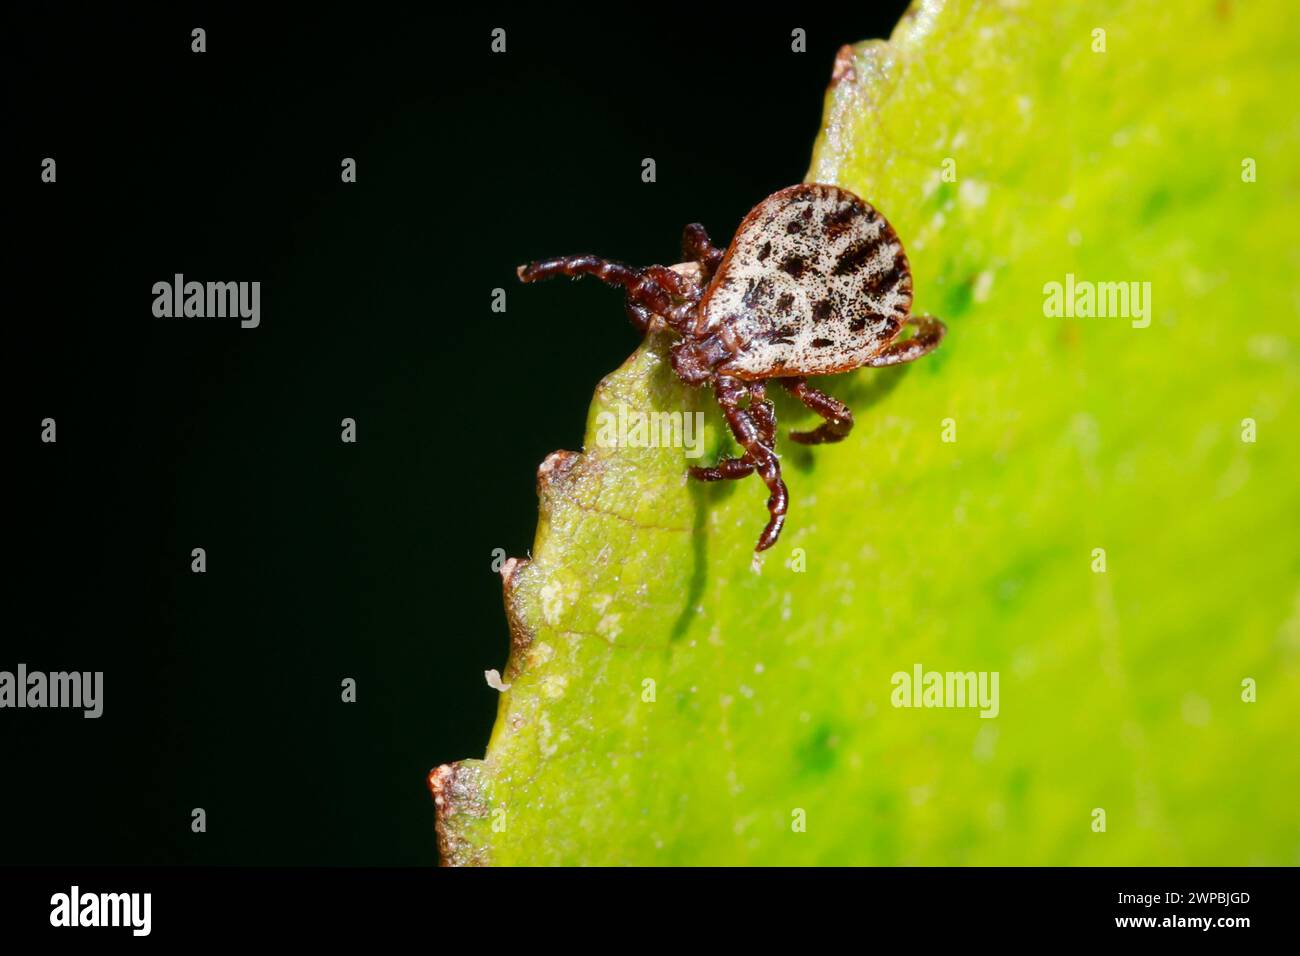 ornate cow tick, ornate dog tick, meadow tick, marsh tick (Dermacentor reticulatus, Dermacentor pictus), sits on a leaf and lurks Stock Photo